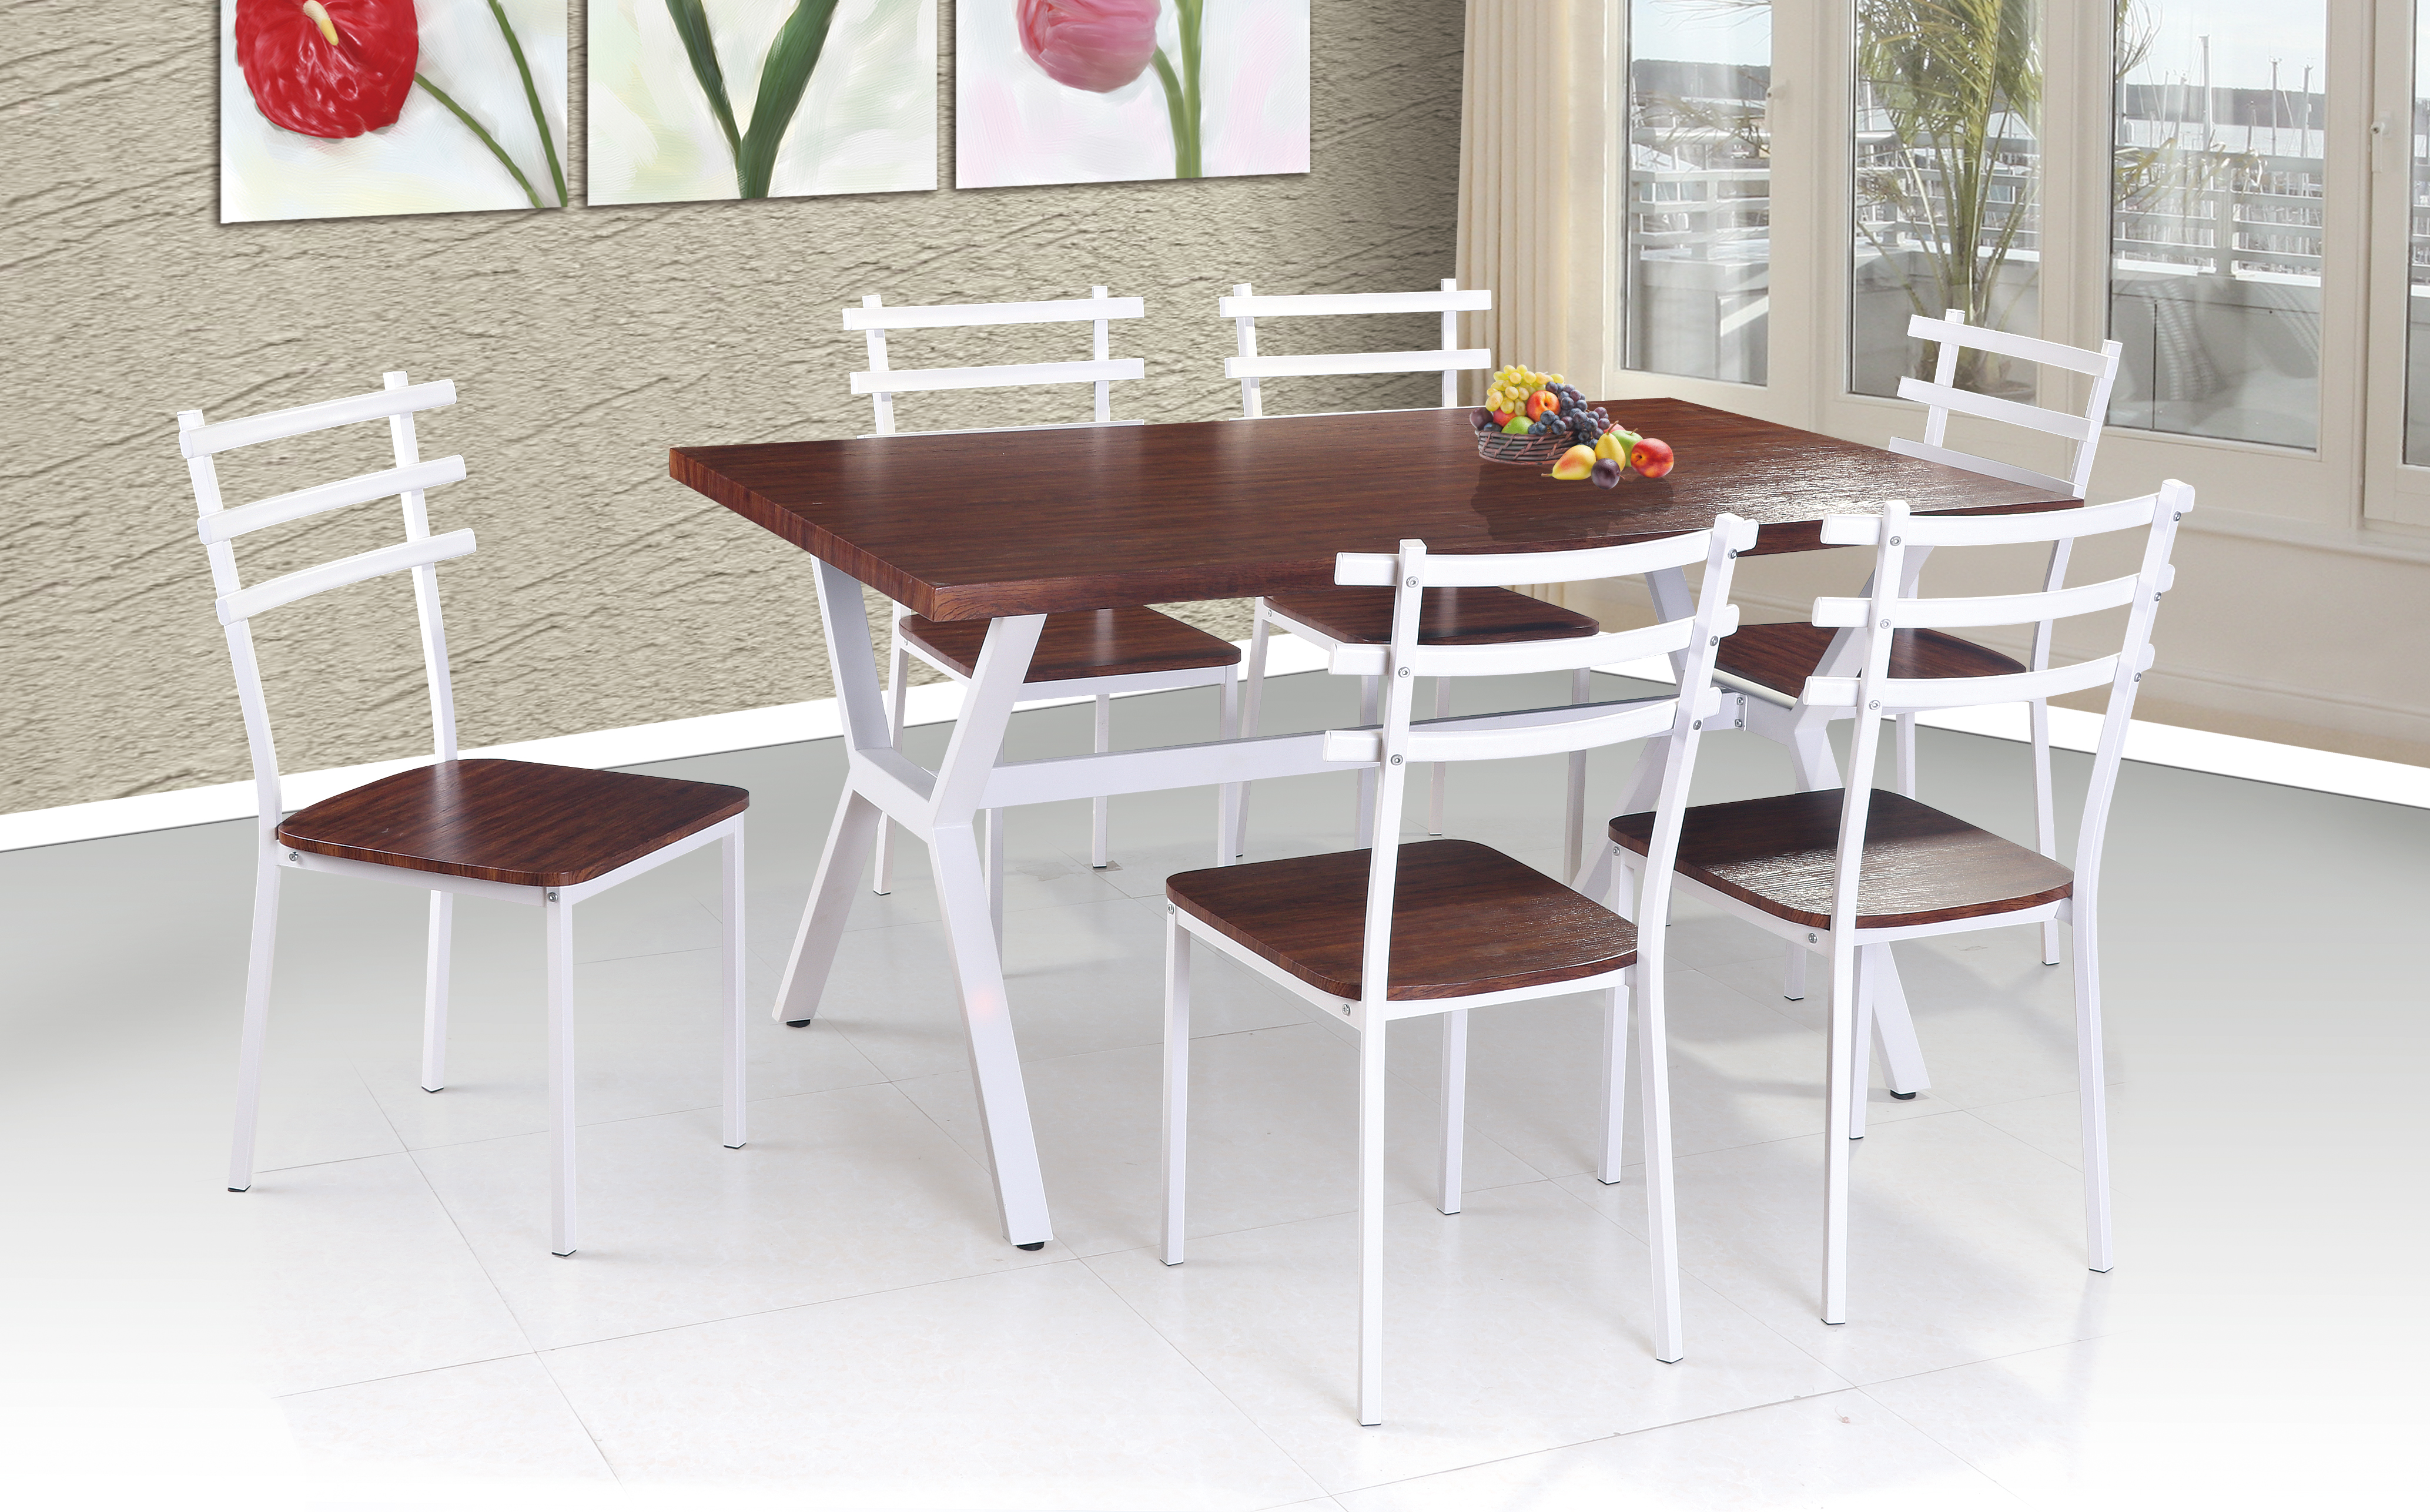 GS-5136 7pc dining set Featured Image